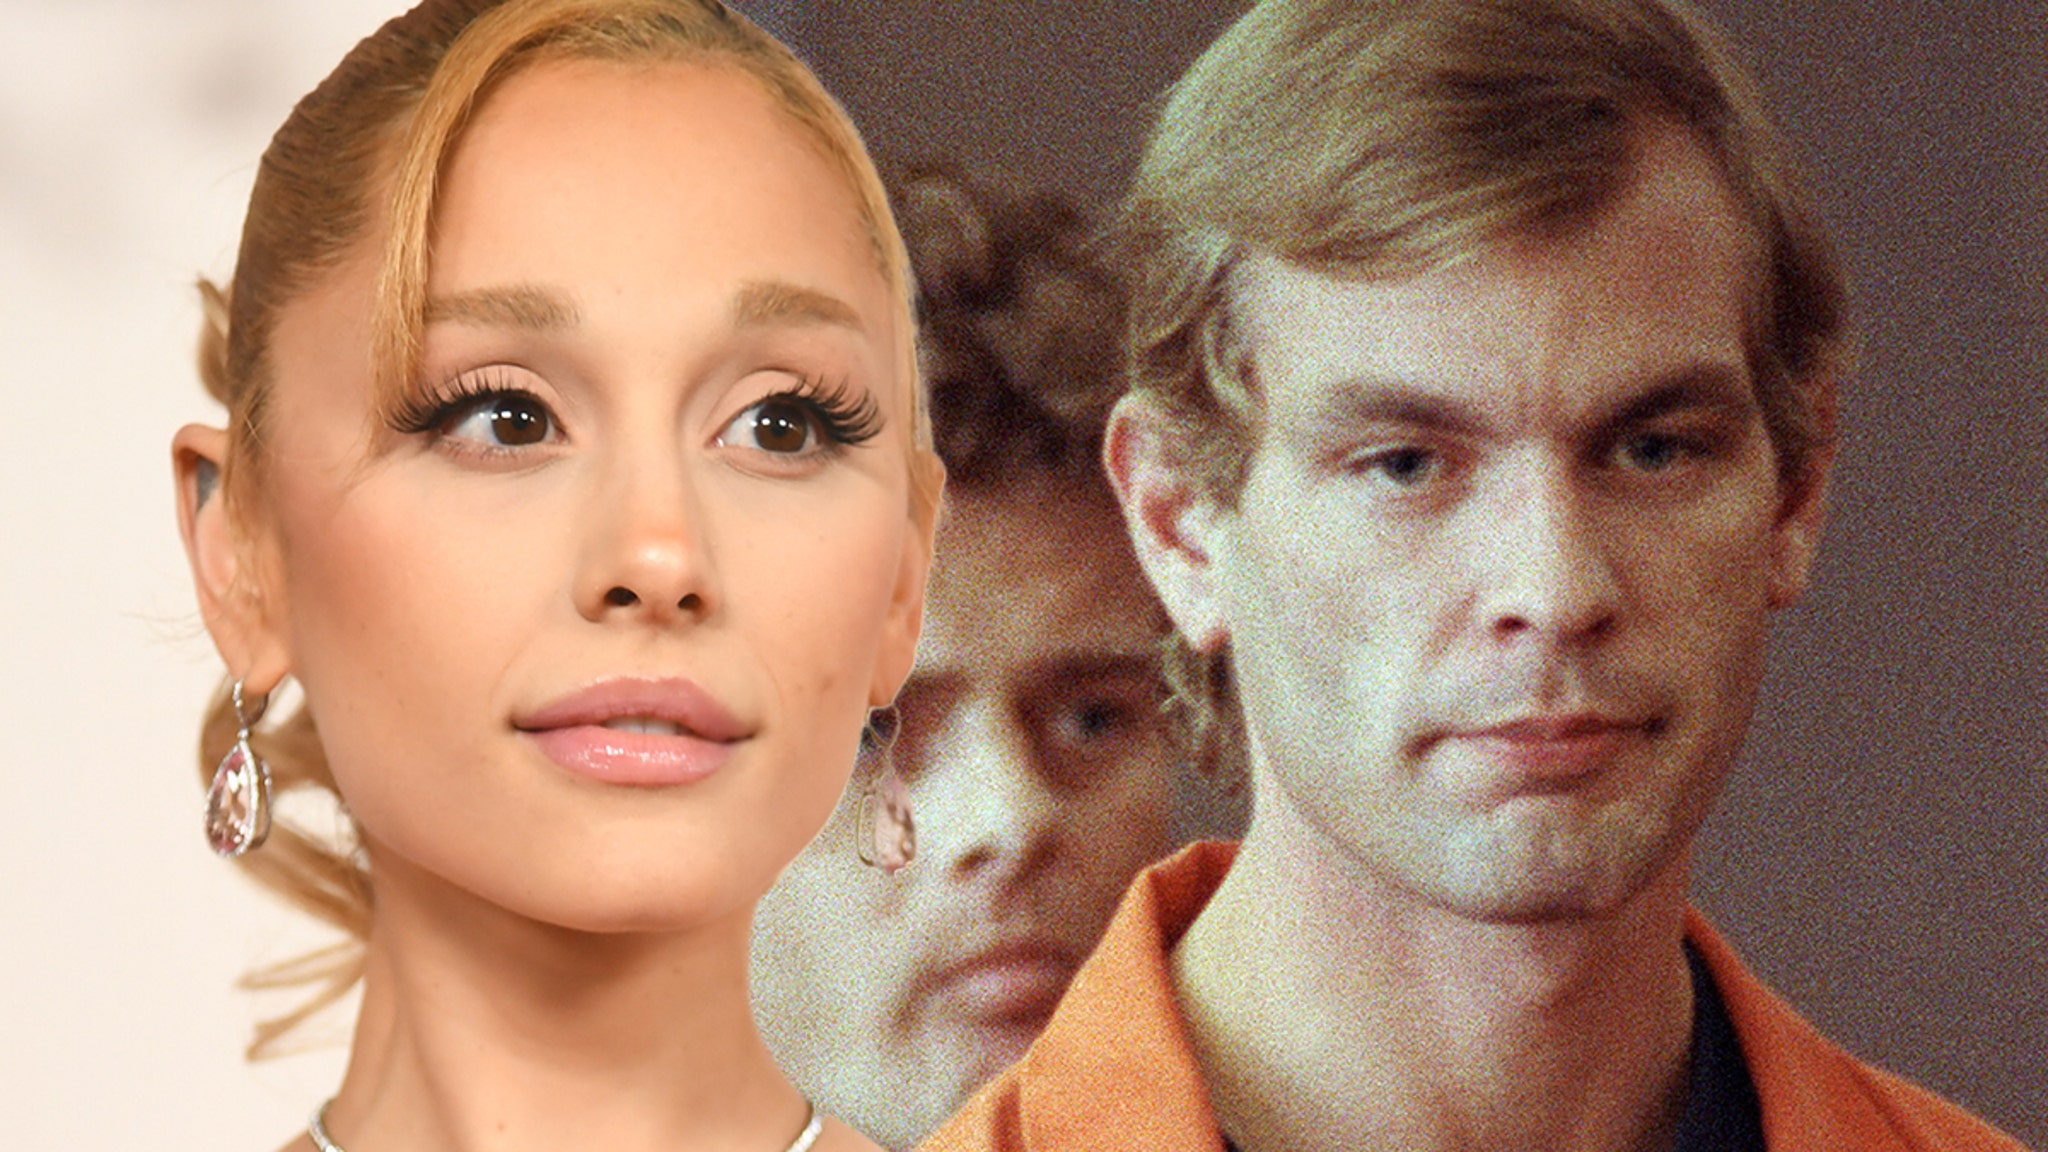 Ariana Grande's Fascination with Jeffrey Dahmer: An Unusual Admission and Public Reactions